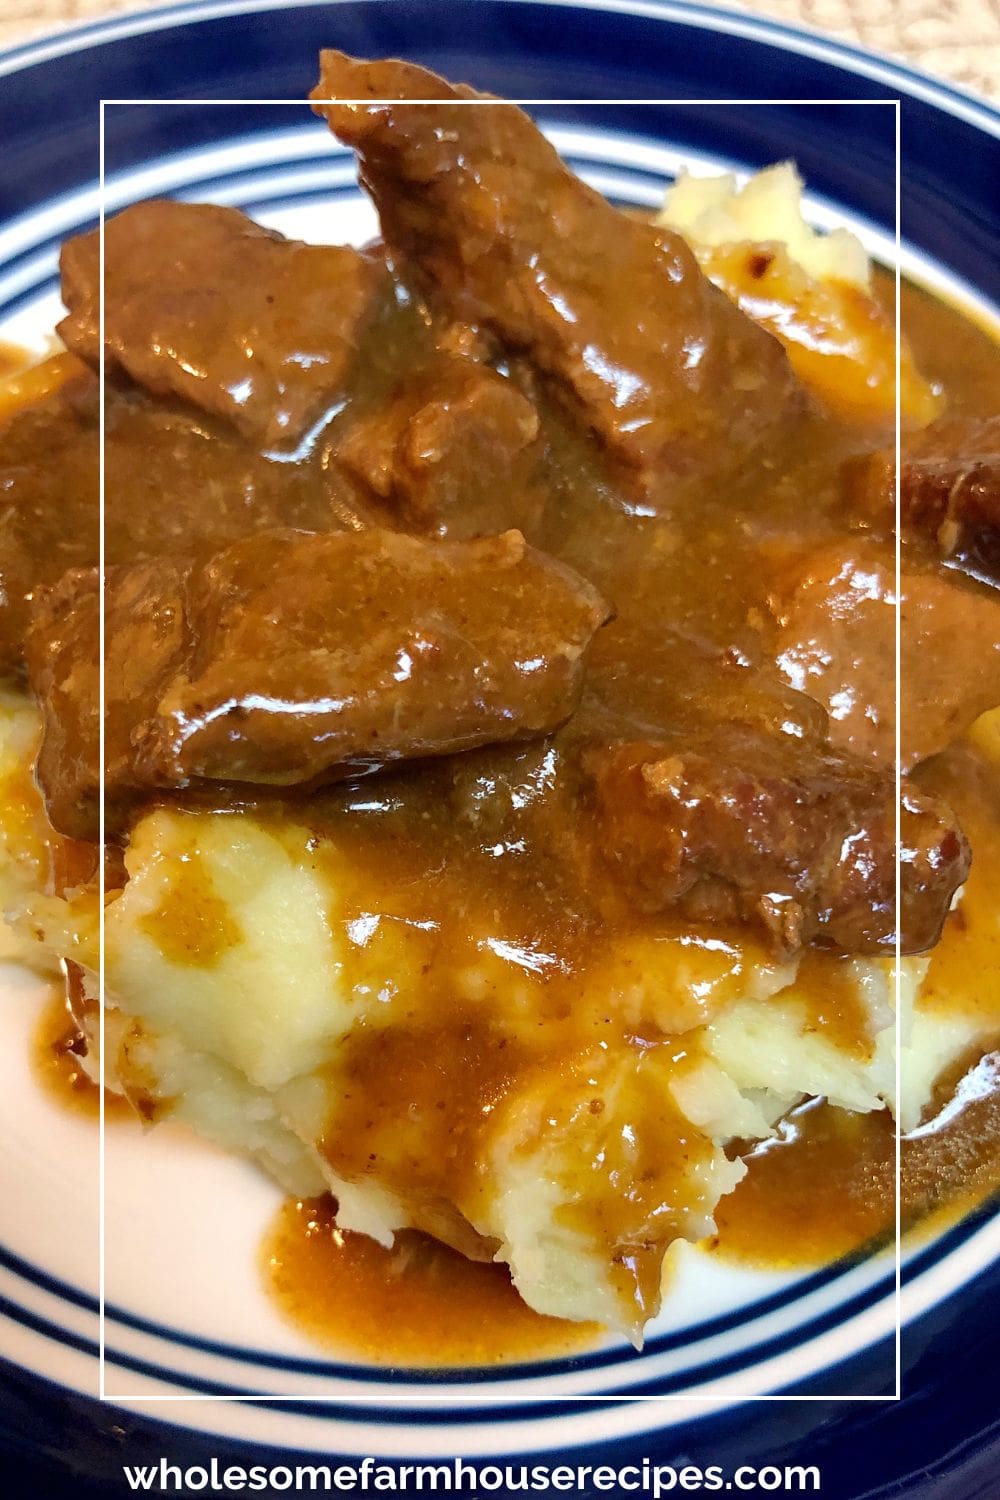 Tender Beef and Gravy over Mashed Potatoes